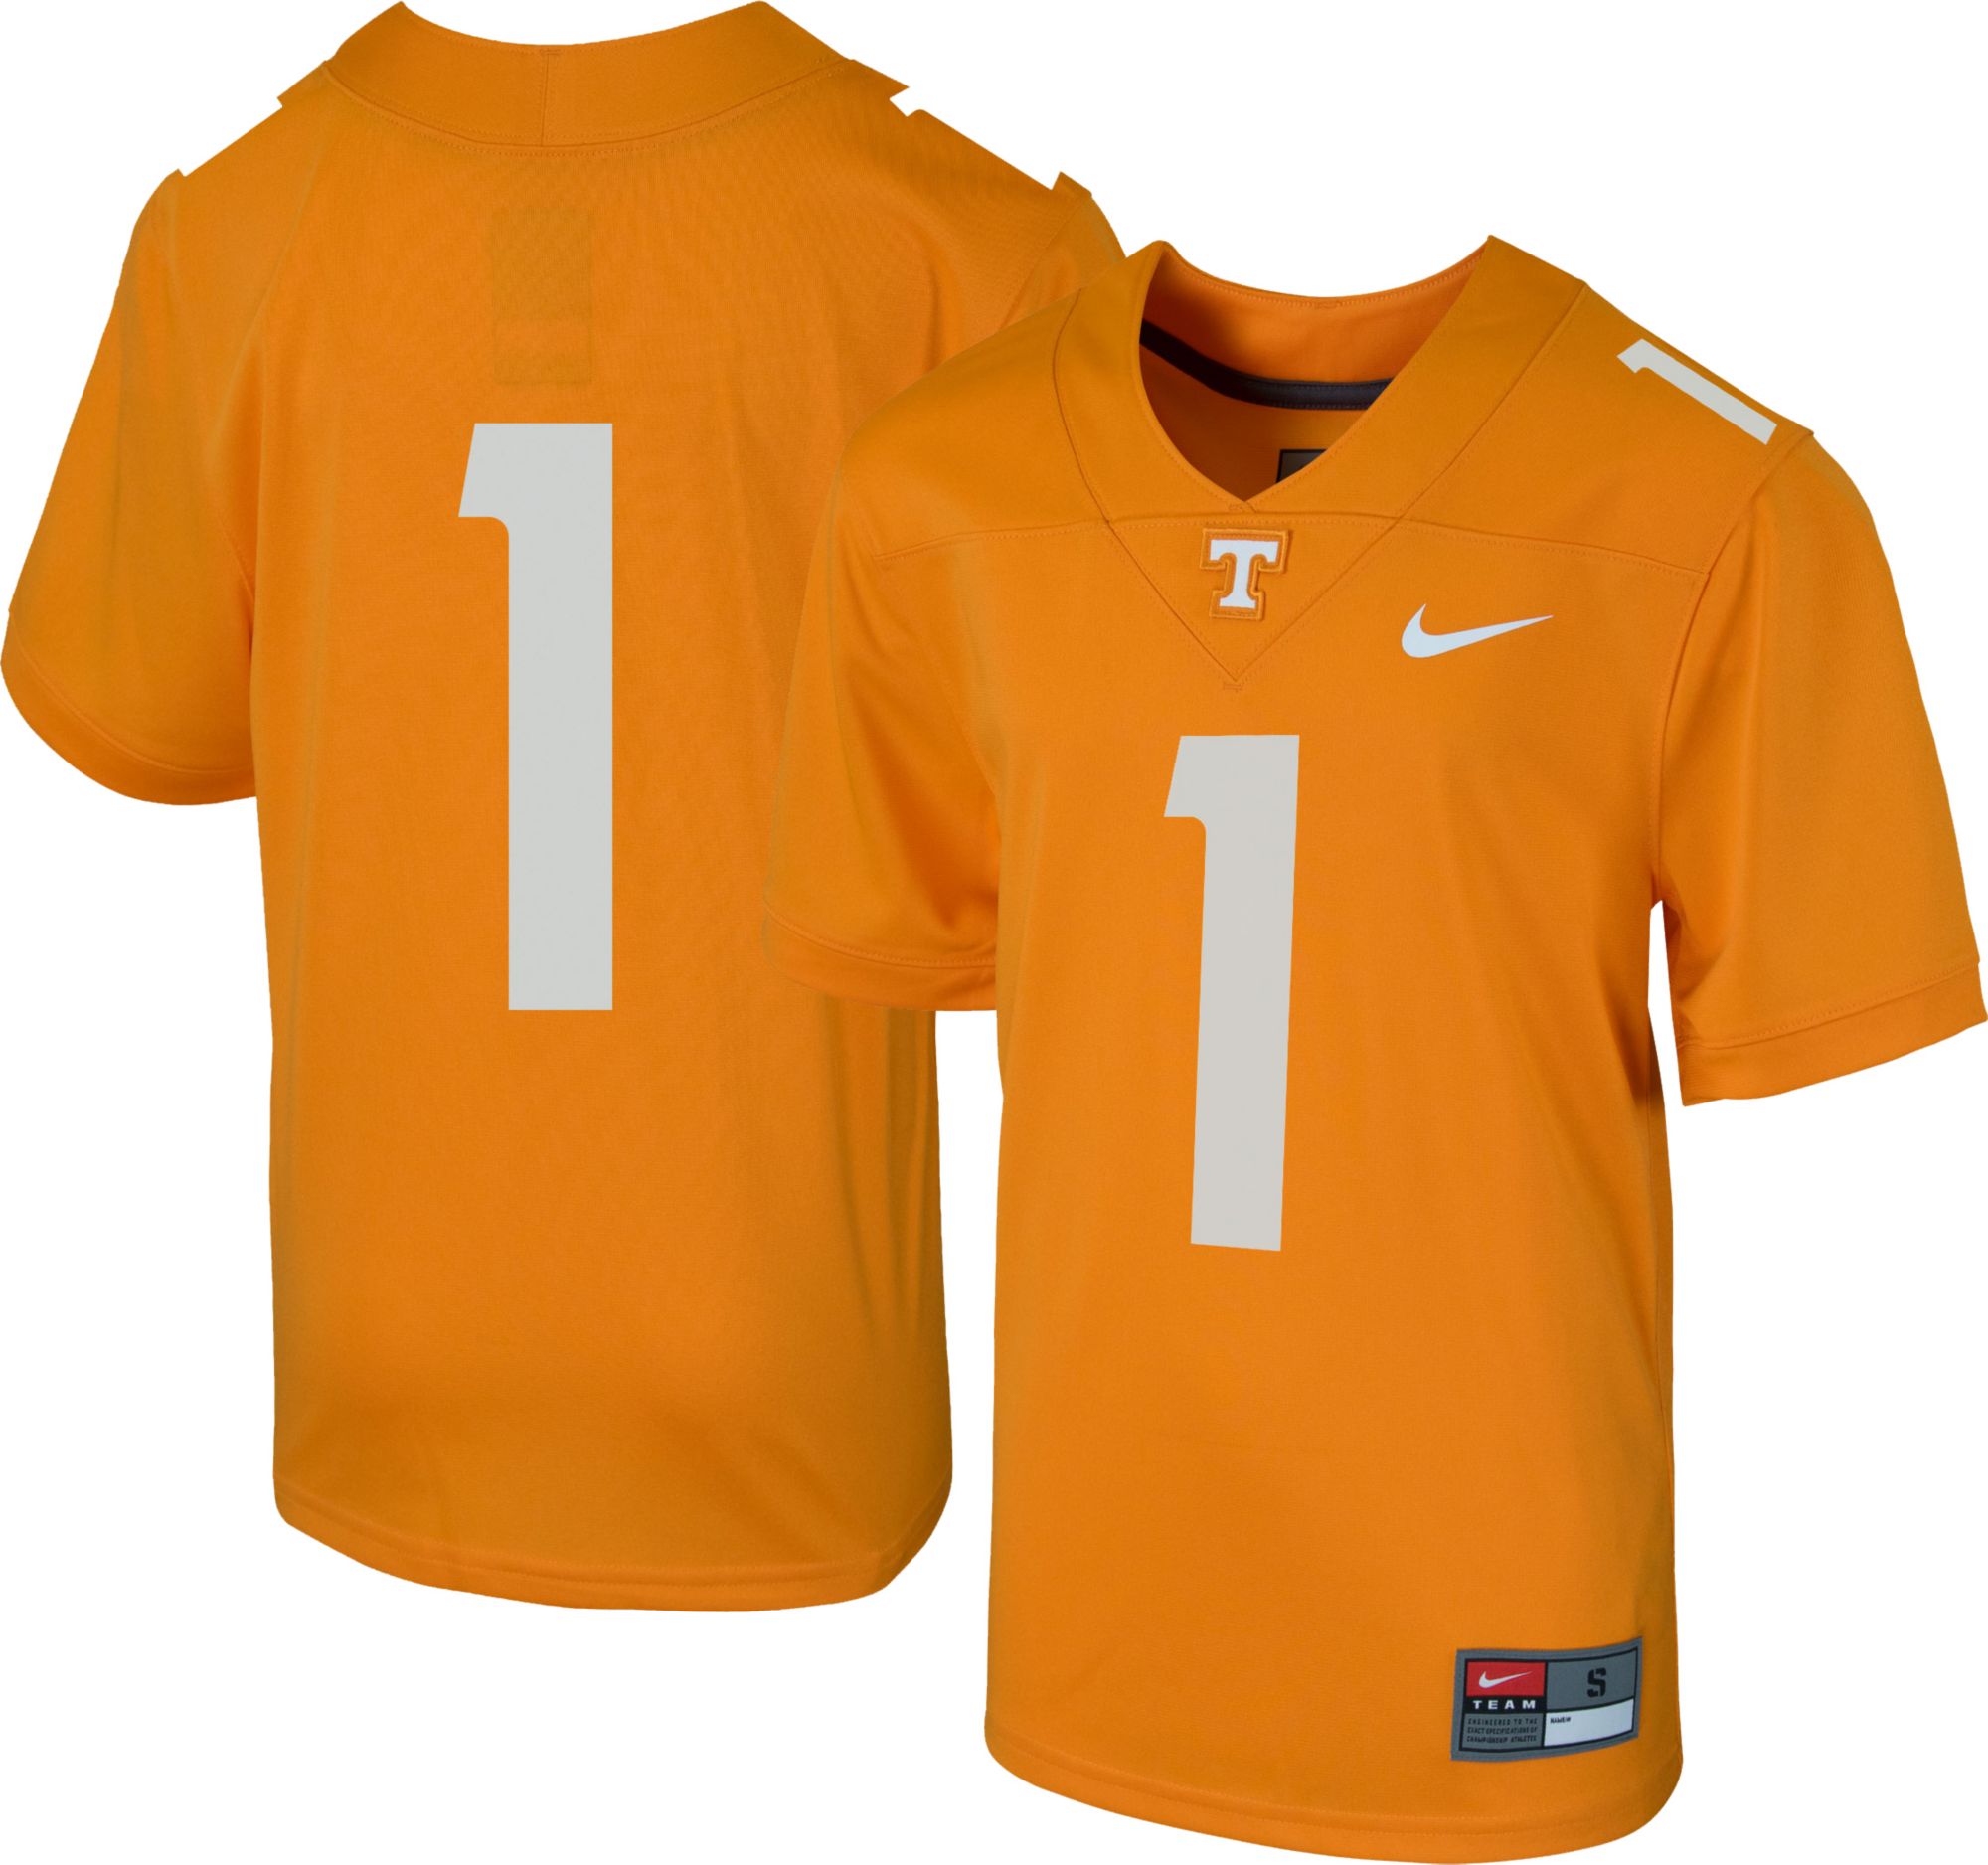 Tennessee Volunteers authentic jersey